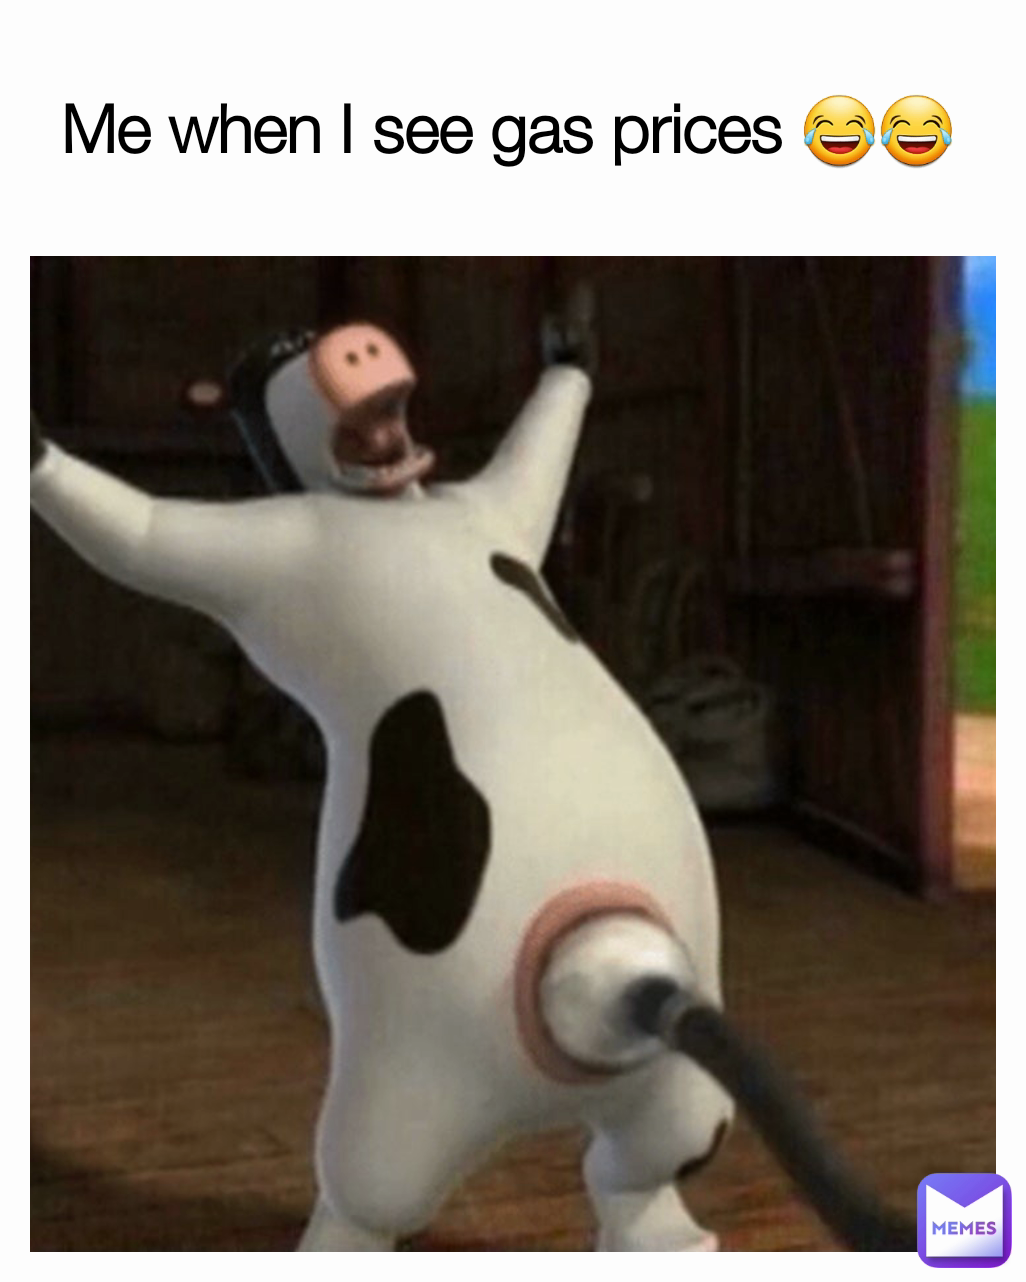 Me when I see gas prices 😂😂